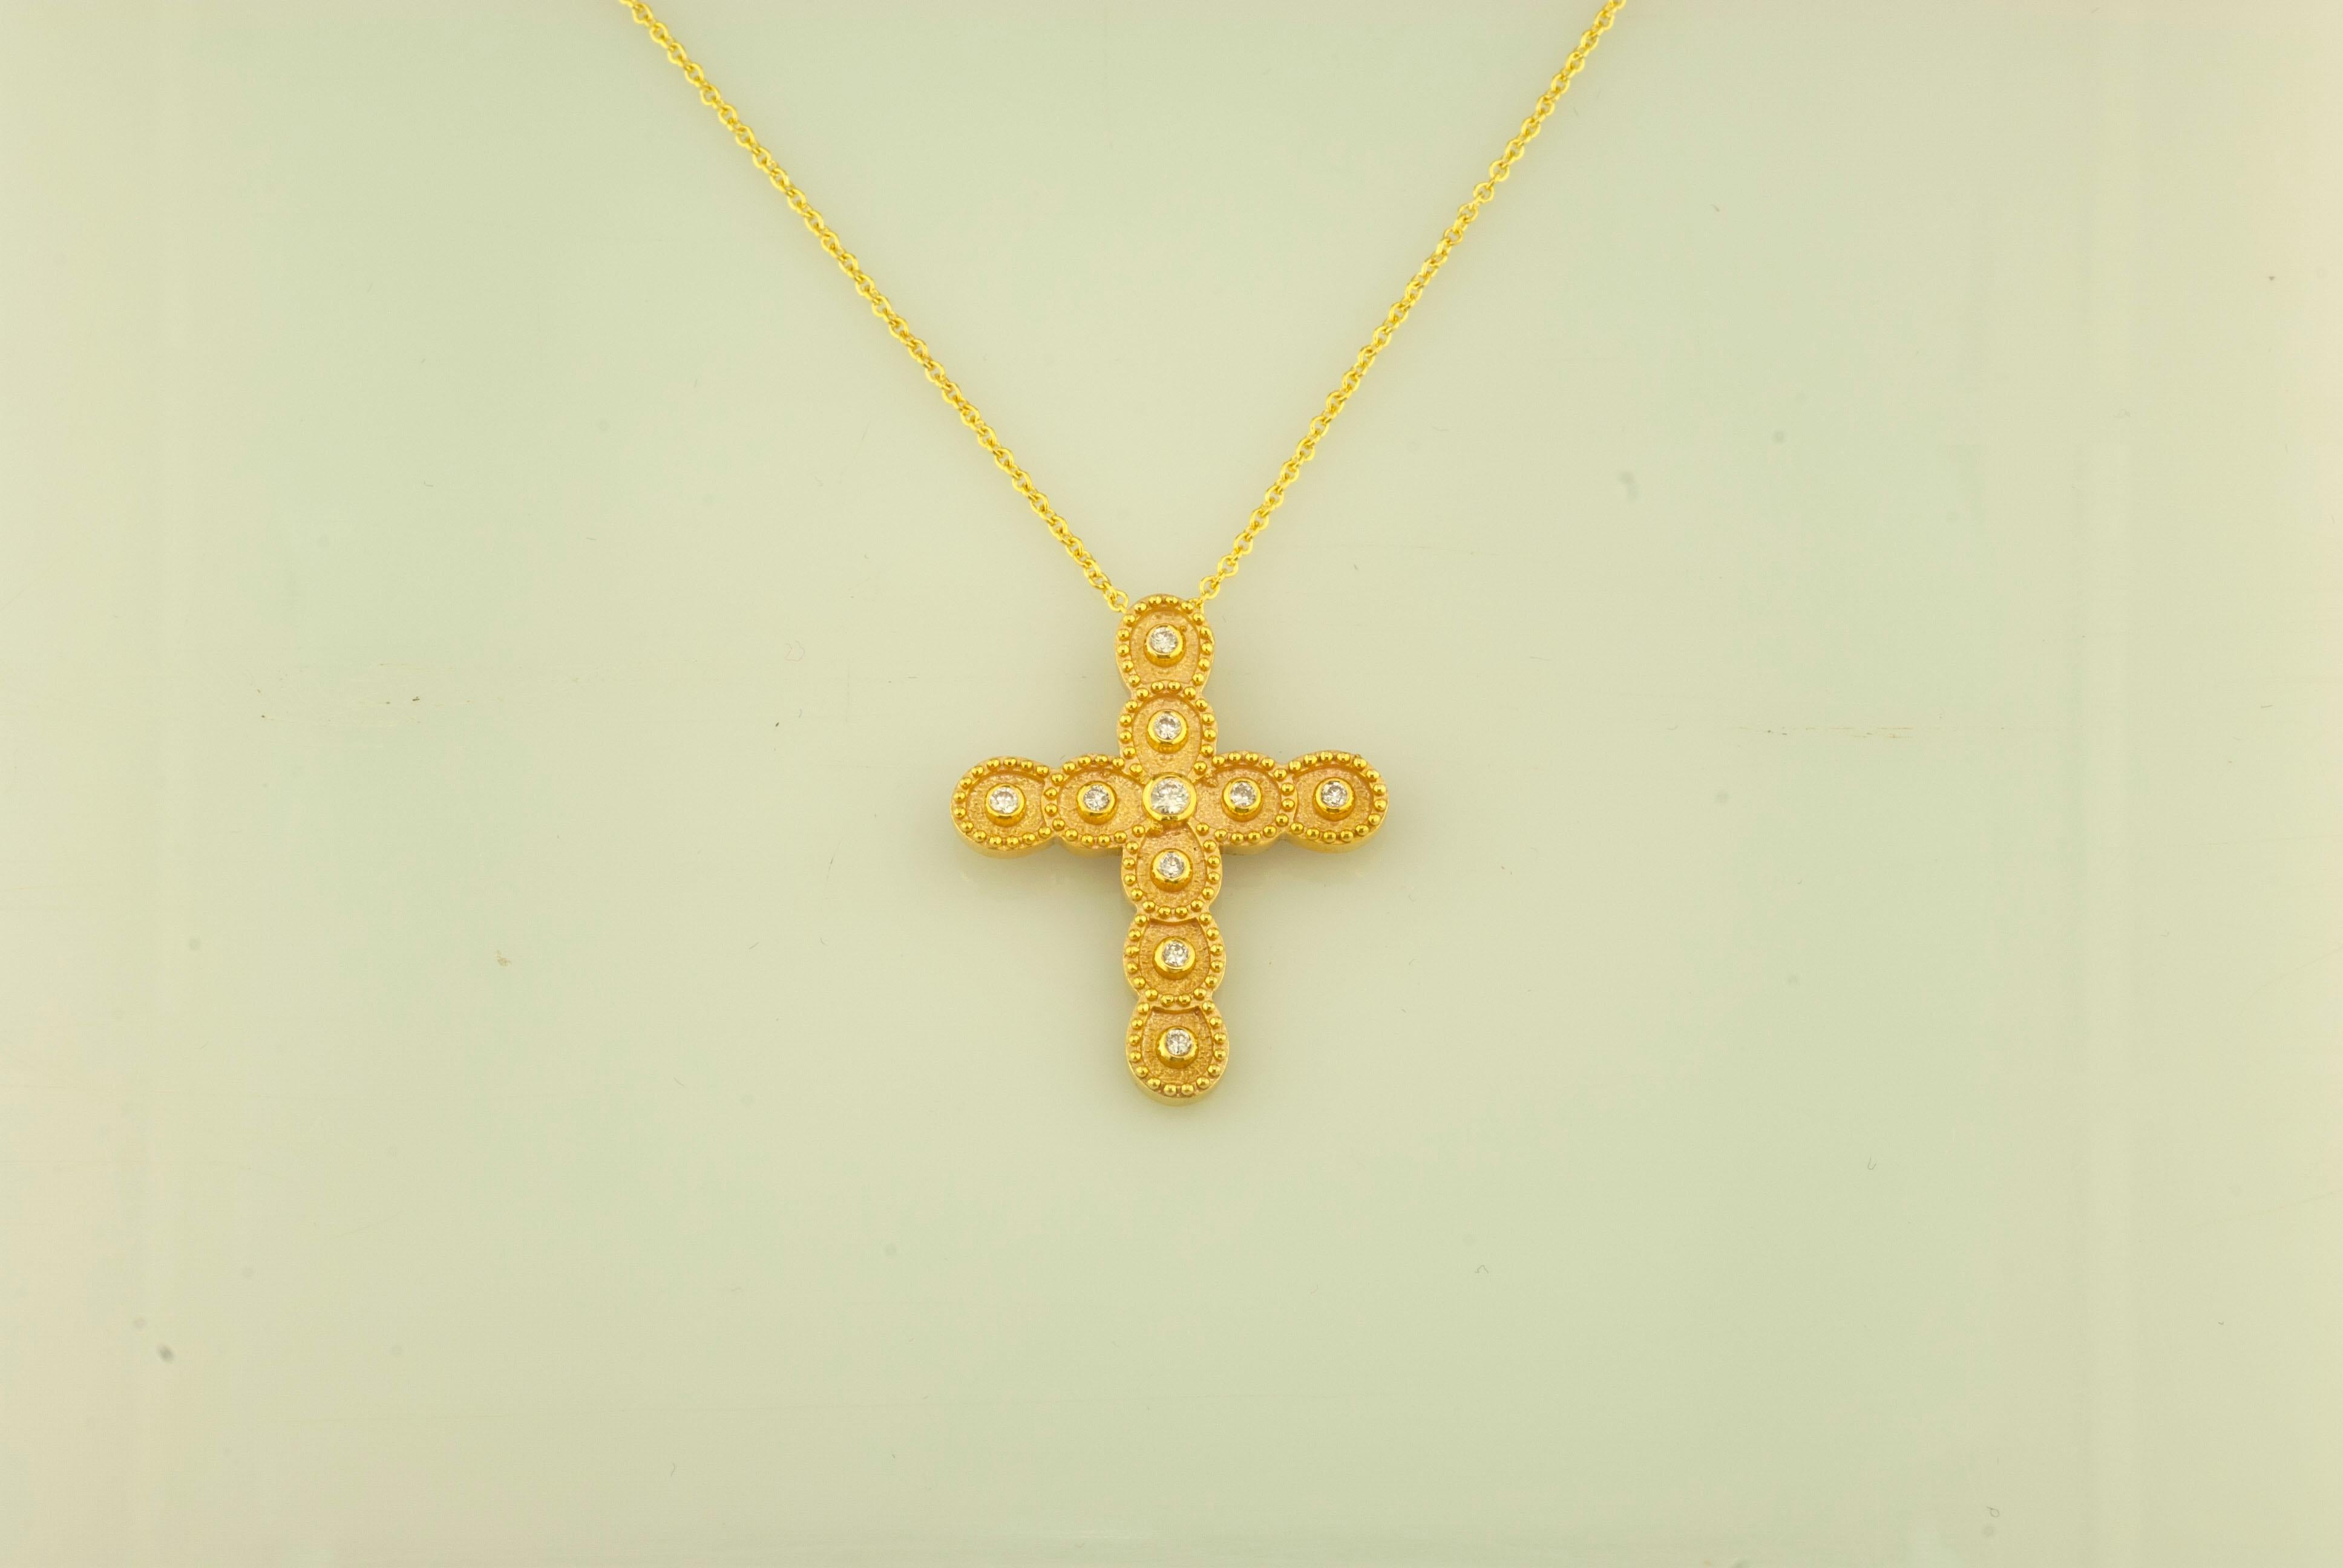 This S.Georgios designer 18 Karat Yellow Gold cross pendant necklace and chain is handmade with microscopically decorated Byzantine-style granulation work and is finished with a unique velvet background look. This beautiful cross pendant necklace